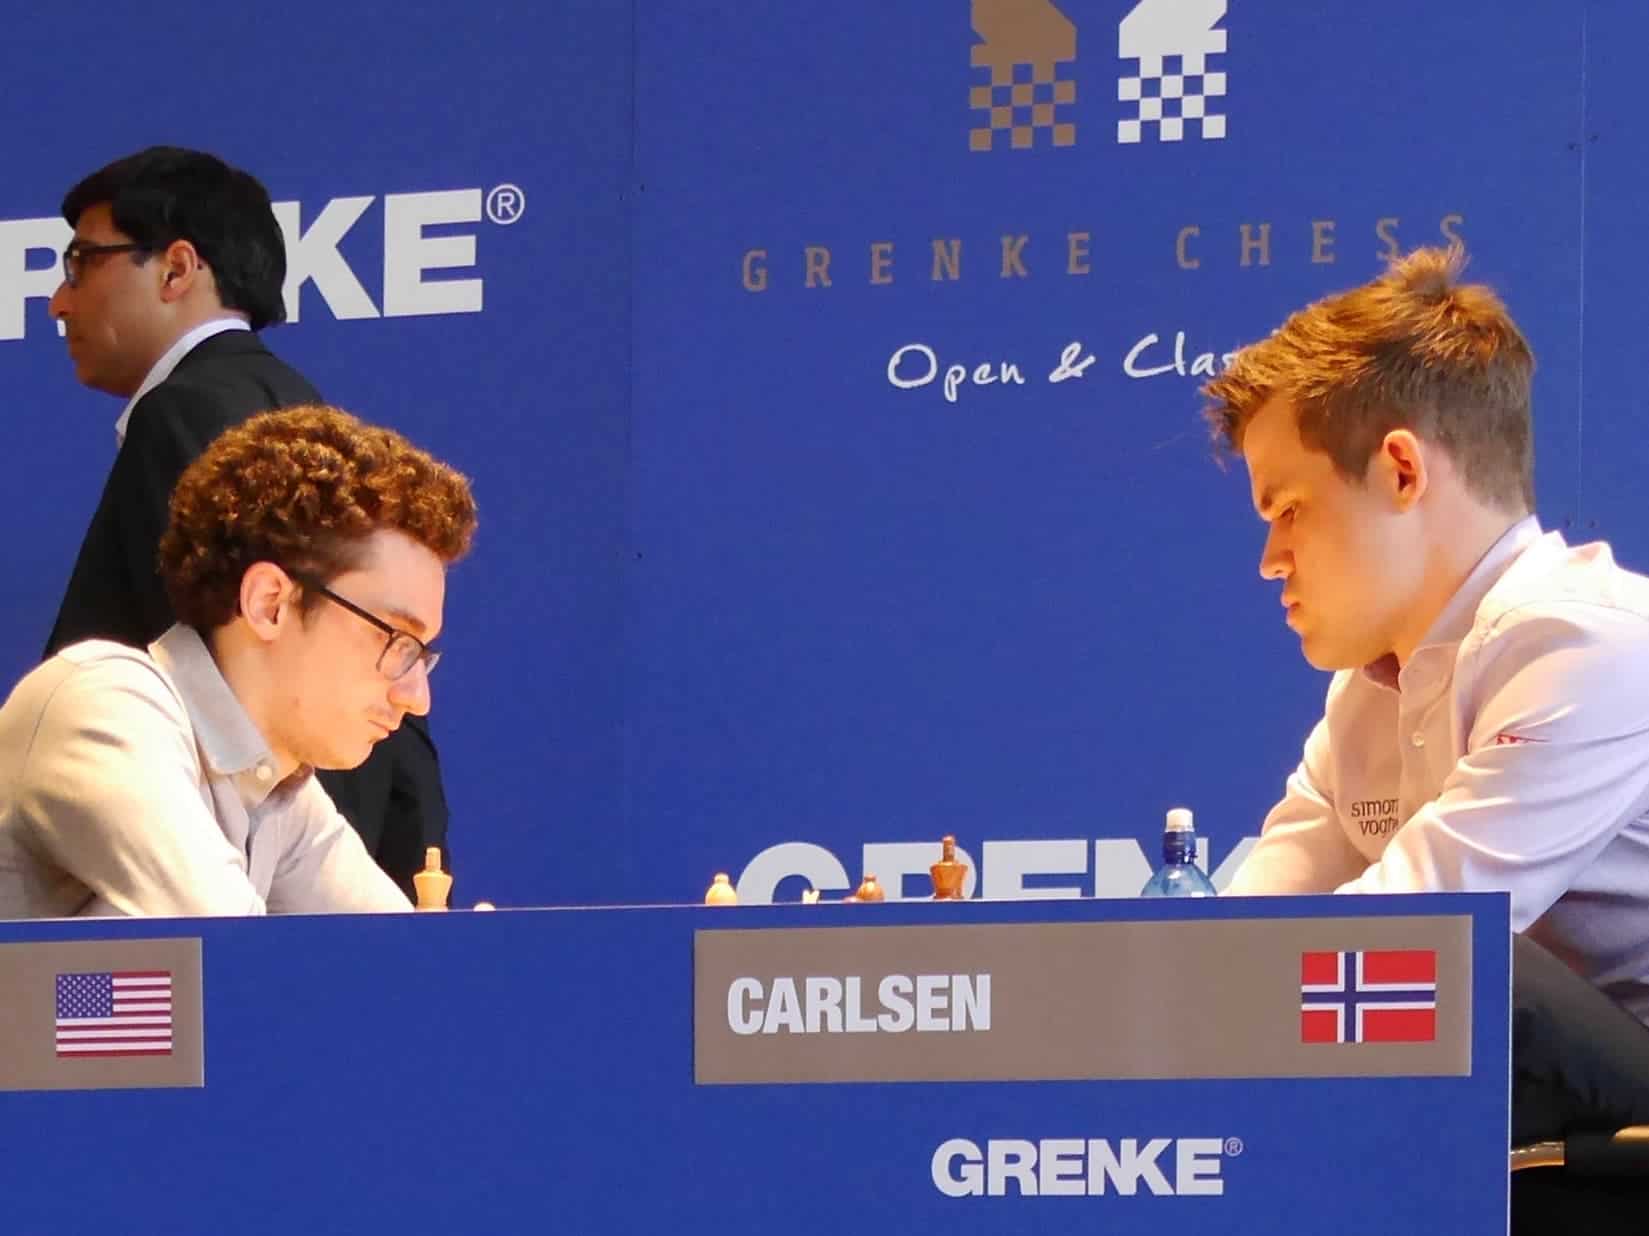 Carlsen (right) and Caruana (left) playing a previous game in Karlsruhe.